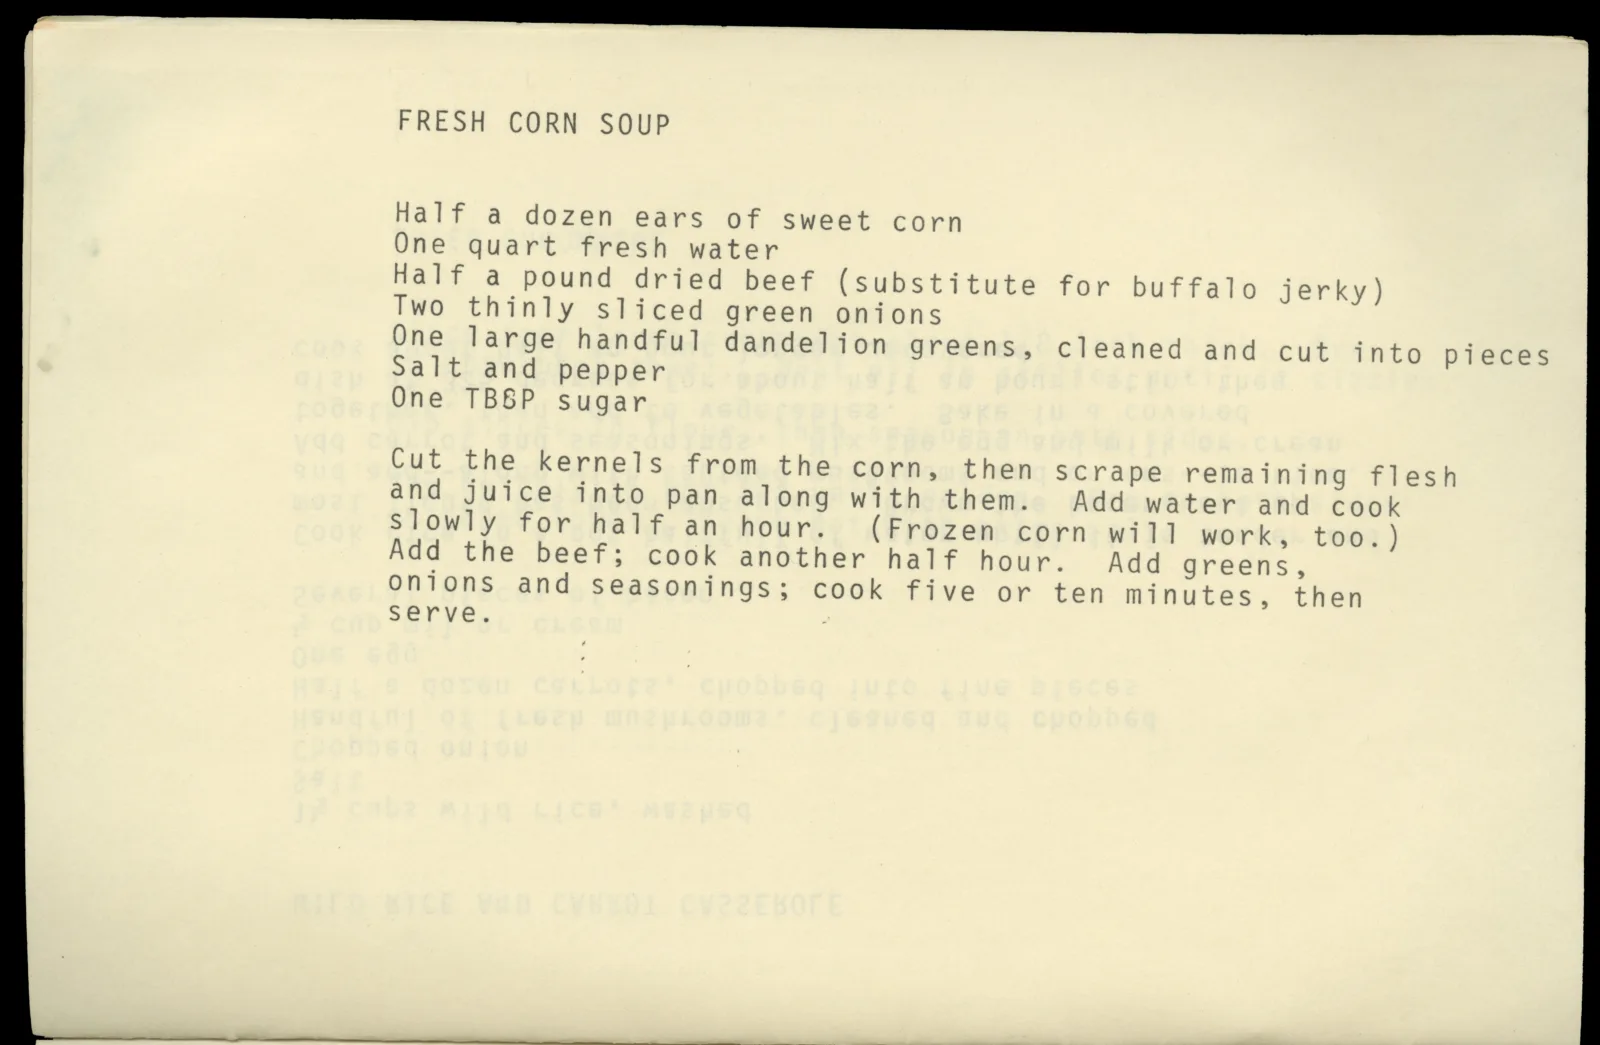 Typed page with recipe for Fresh Corn Soup. The recipe is as follows: "Half a dozen ears of sweet corn, one quart fresh water, half a pound dried beef (substitute for buffalo jerky), two thinly sliced green onions, one large handful dandelion greens (cleaned and cut into pieces), salt and pepper, one tbsp sugar. Cut the kernels from the corn, then scrape remaining flesh and juice into pan along with them. Add water and cook slowly for half and hour. (Frozen corn will work, too). Add the beef; cook another half hour. Add the greens, onions, and seasonings; cook five or ten minutes then serve.